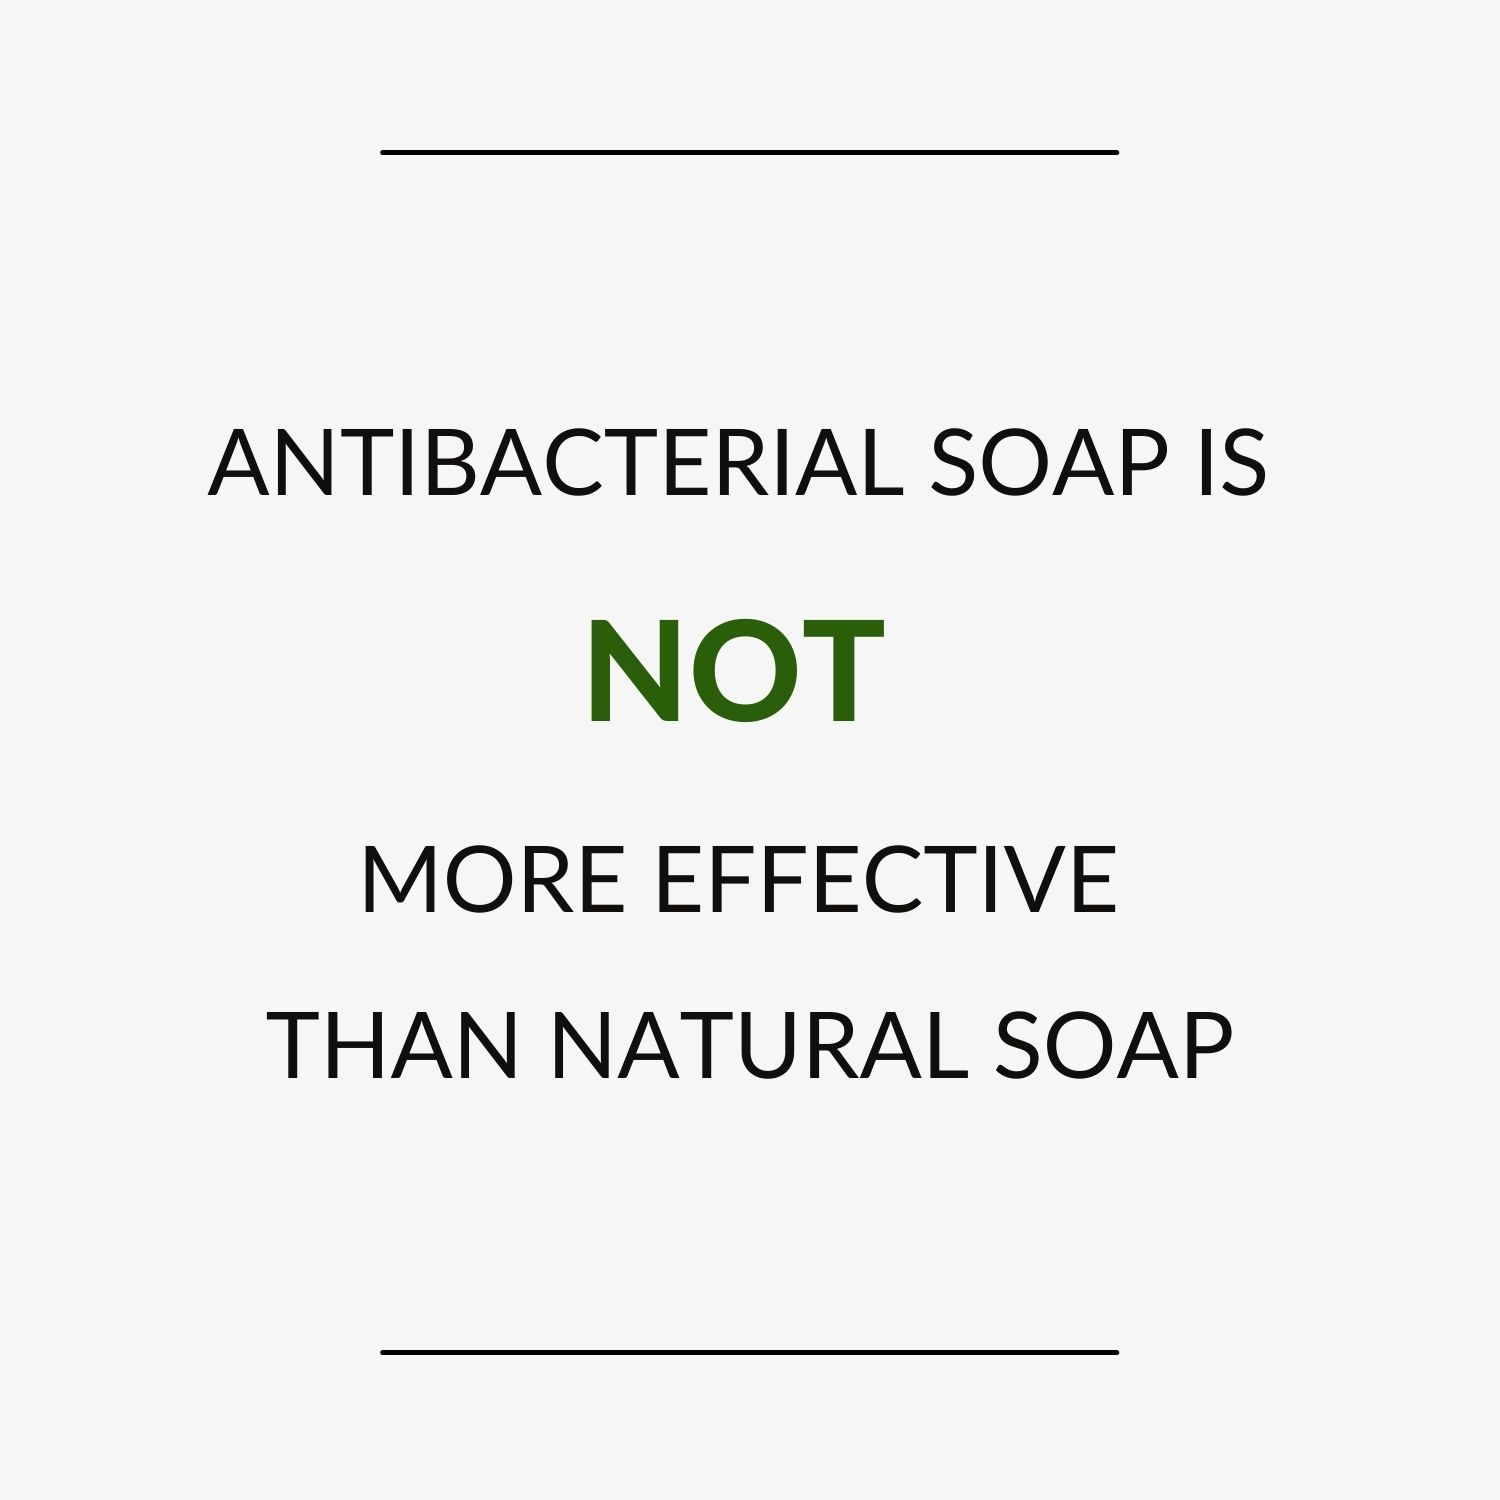 Fact: Antibacterial soap is not more effective than natural soap